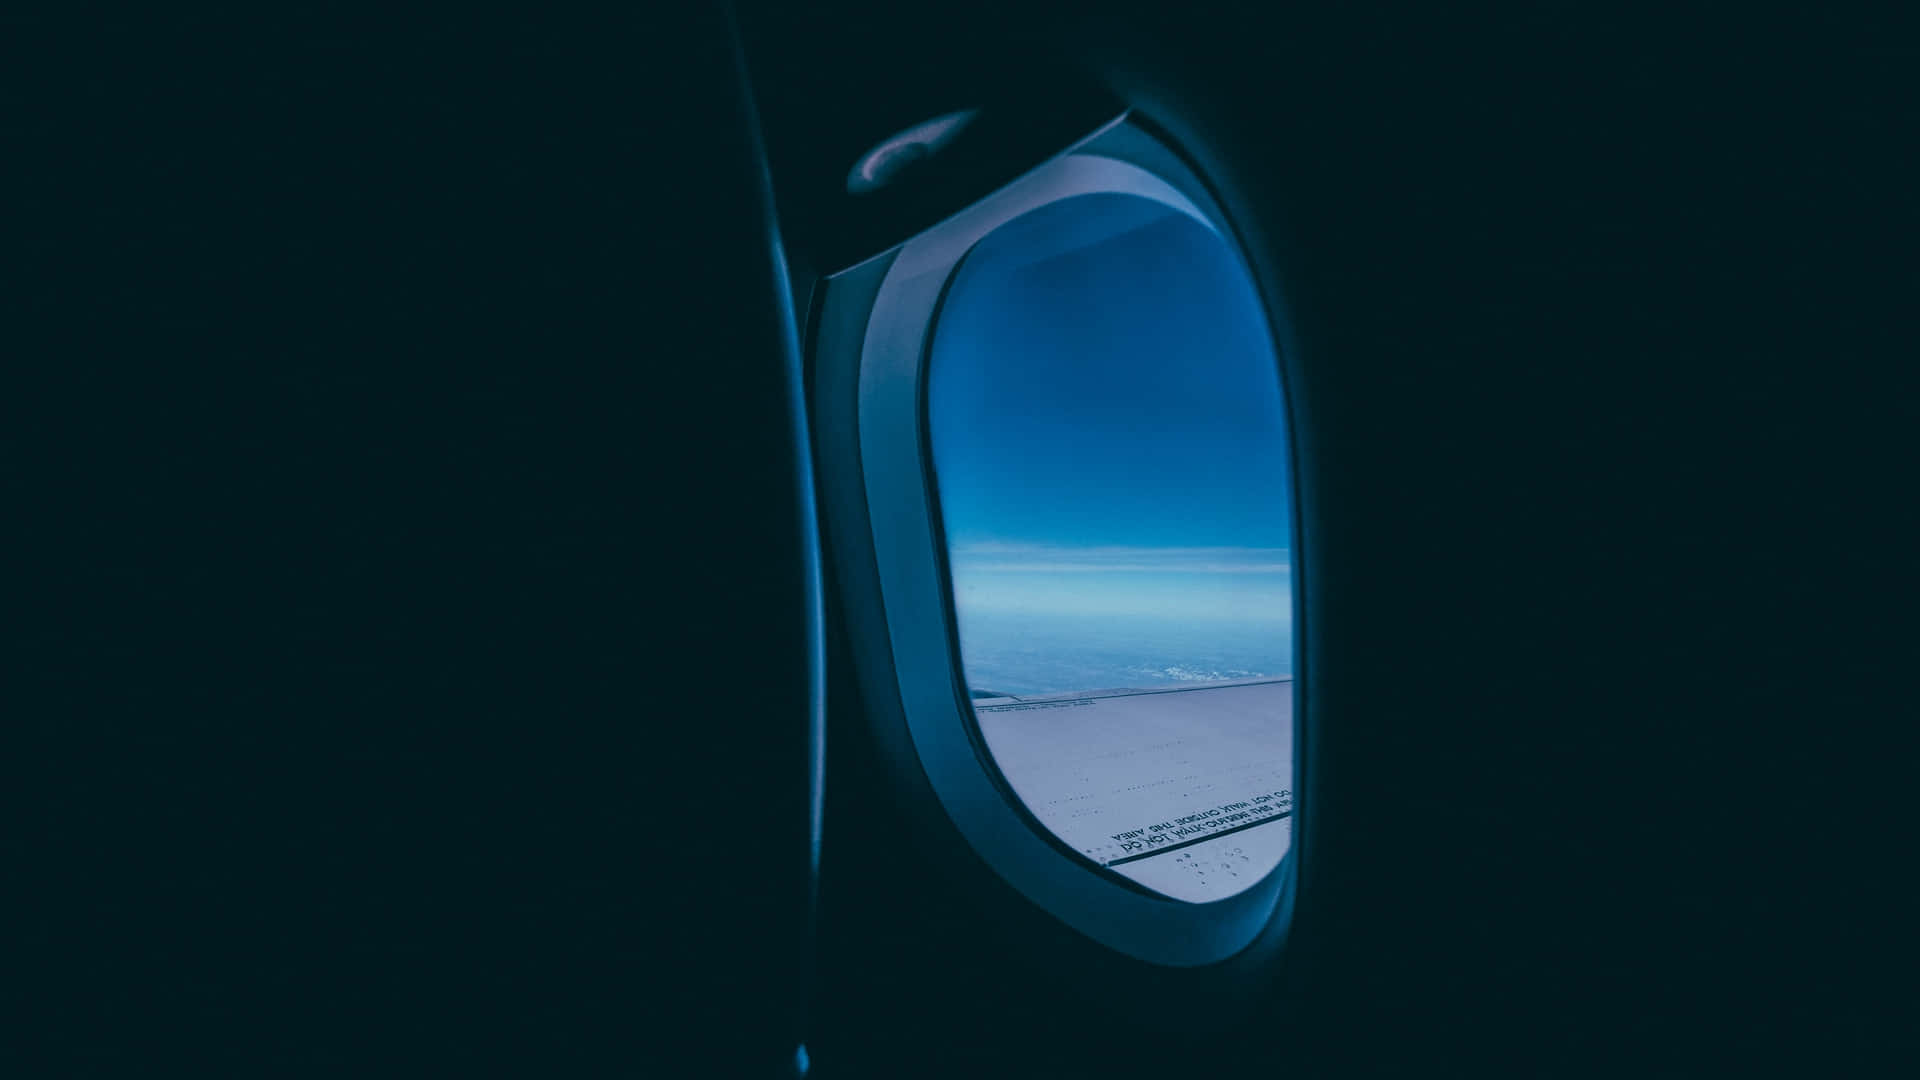 Gazing at the Blue Sky Through an Airplane Window Wallpaper